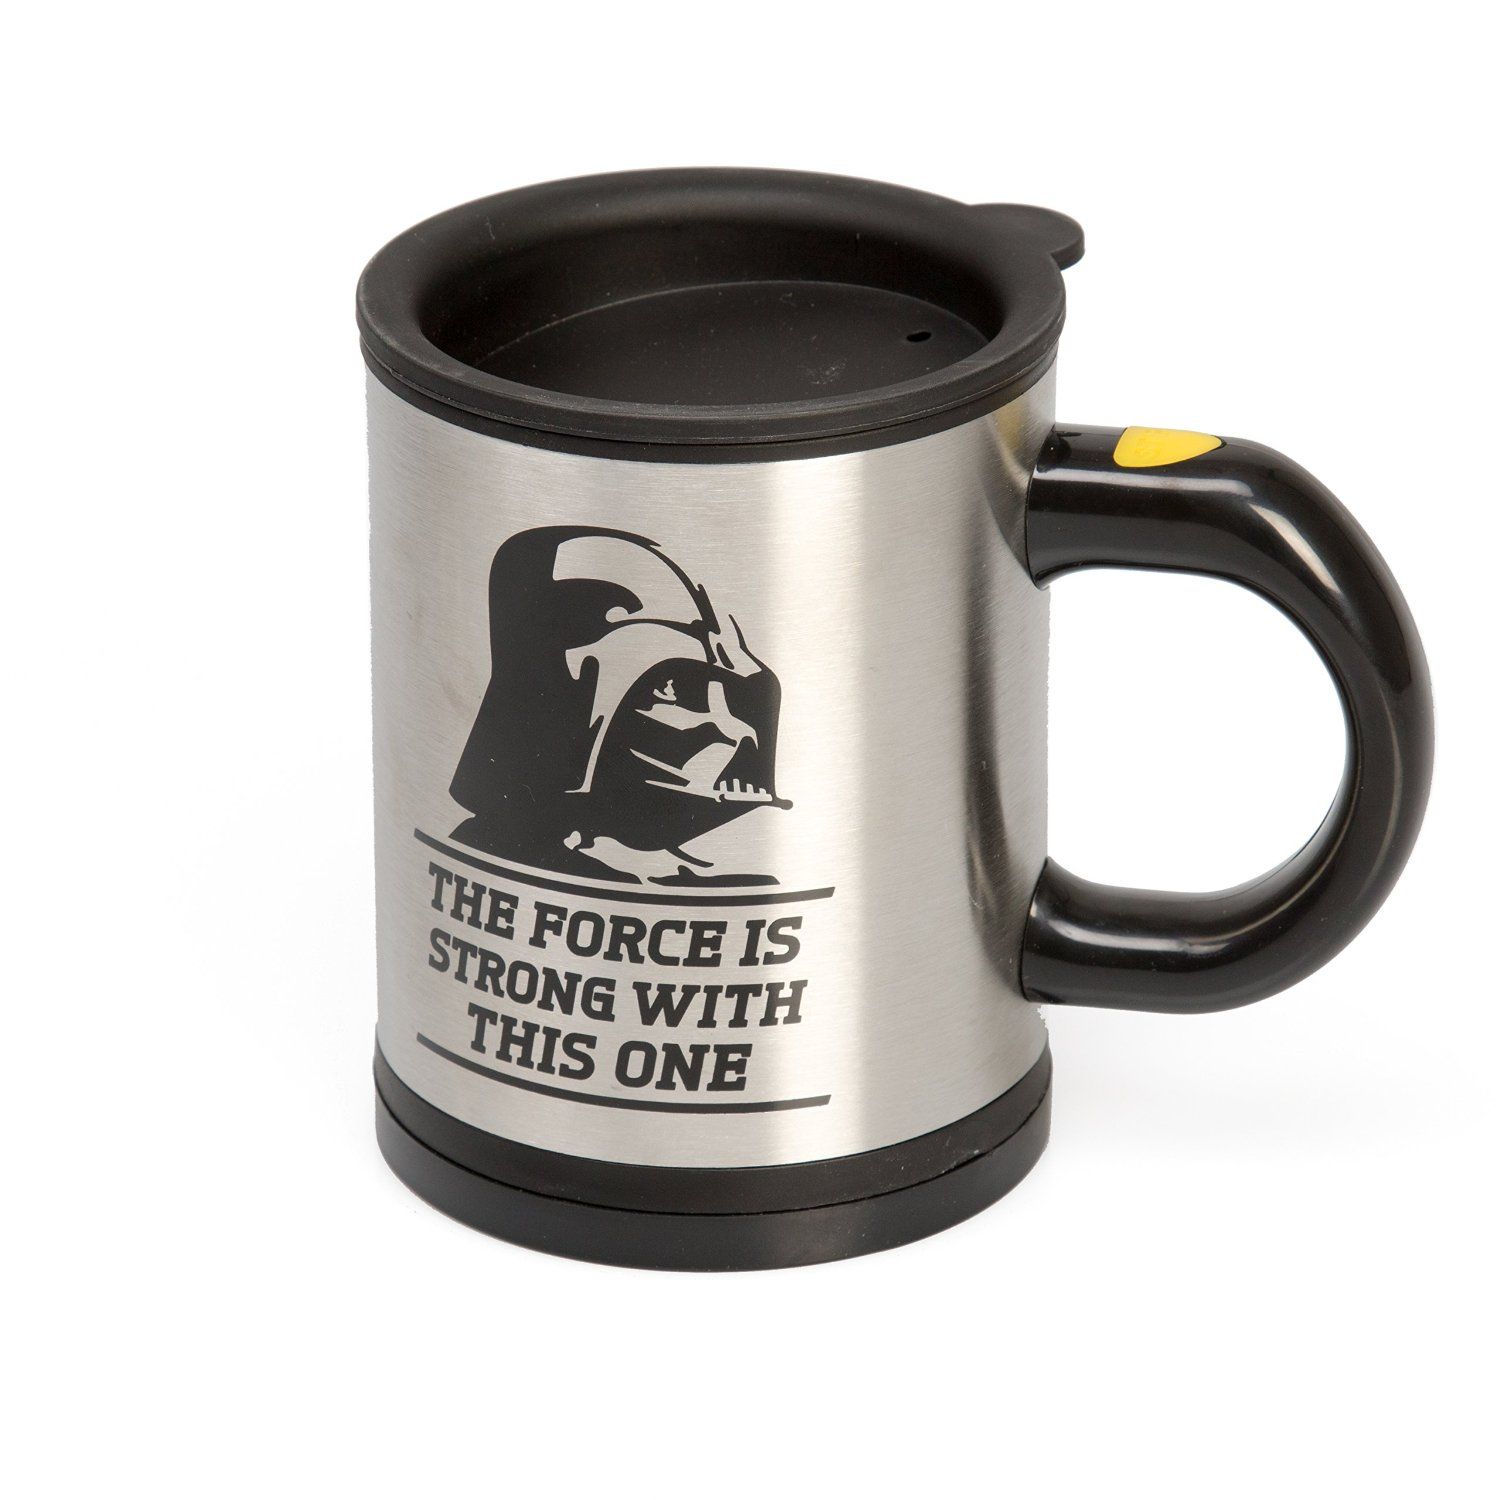 Star Wars Darth Vader Self Stirring and Spinning Mug - Mix Your Drink with the Force - Star Wars Darth Vader Self Stirring and Spinning Mug - Mix Your Drink with the Force -   Star Wars Household Items